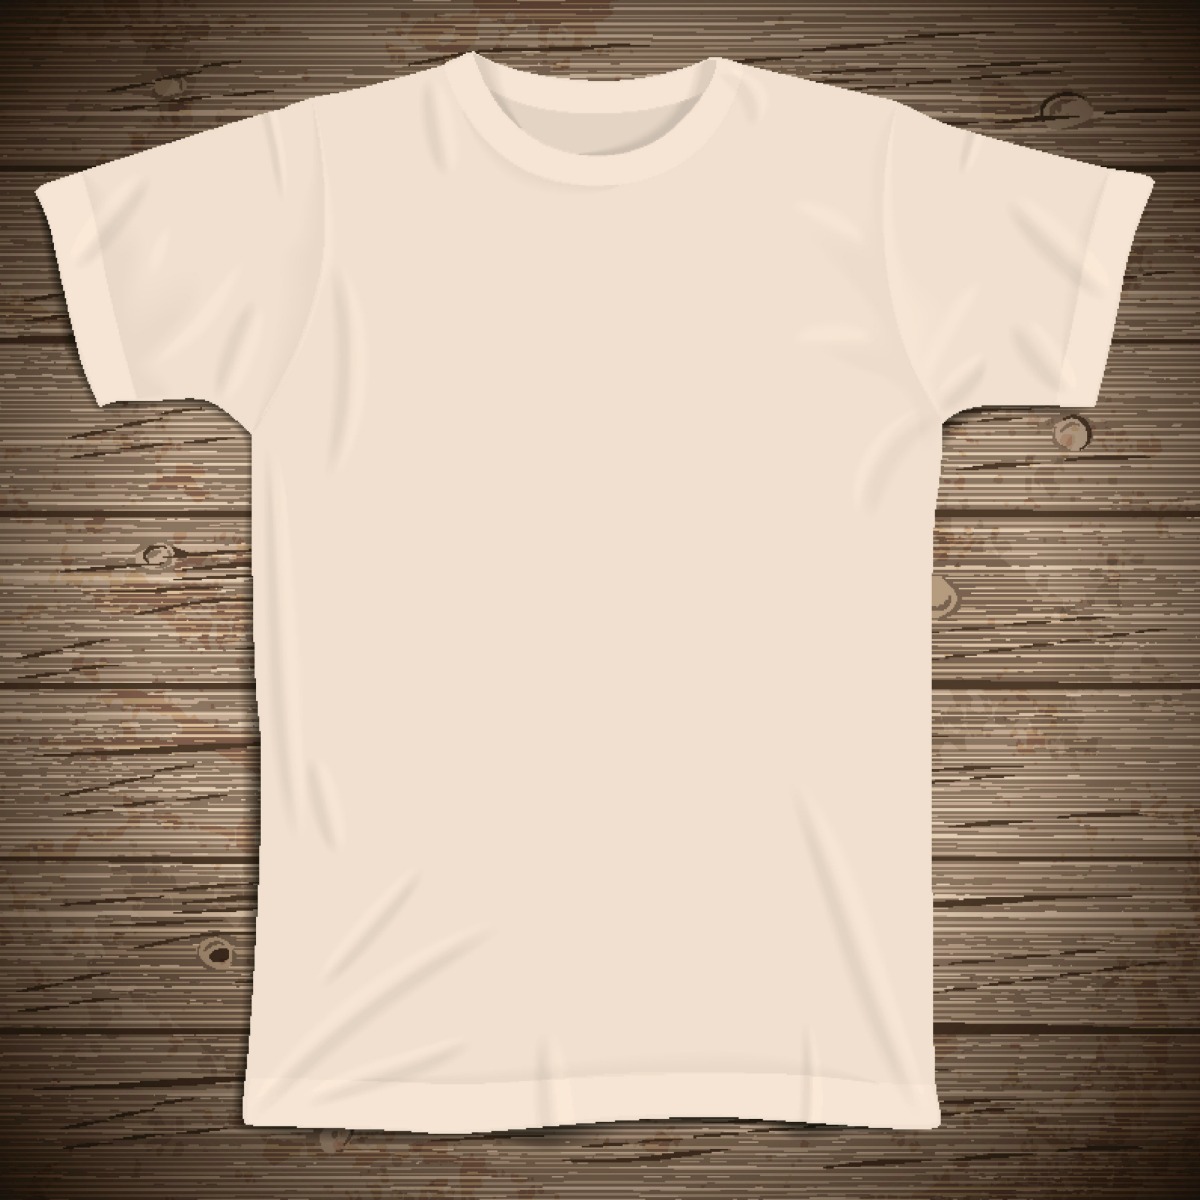 Bleached White Shirt is Now Yellow | ThriftyFun